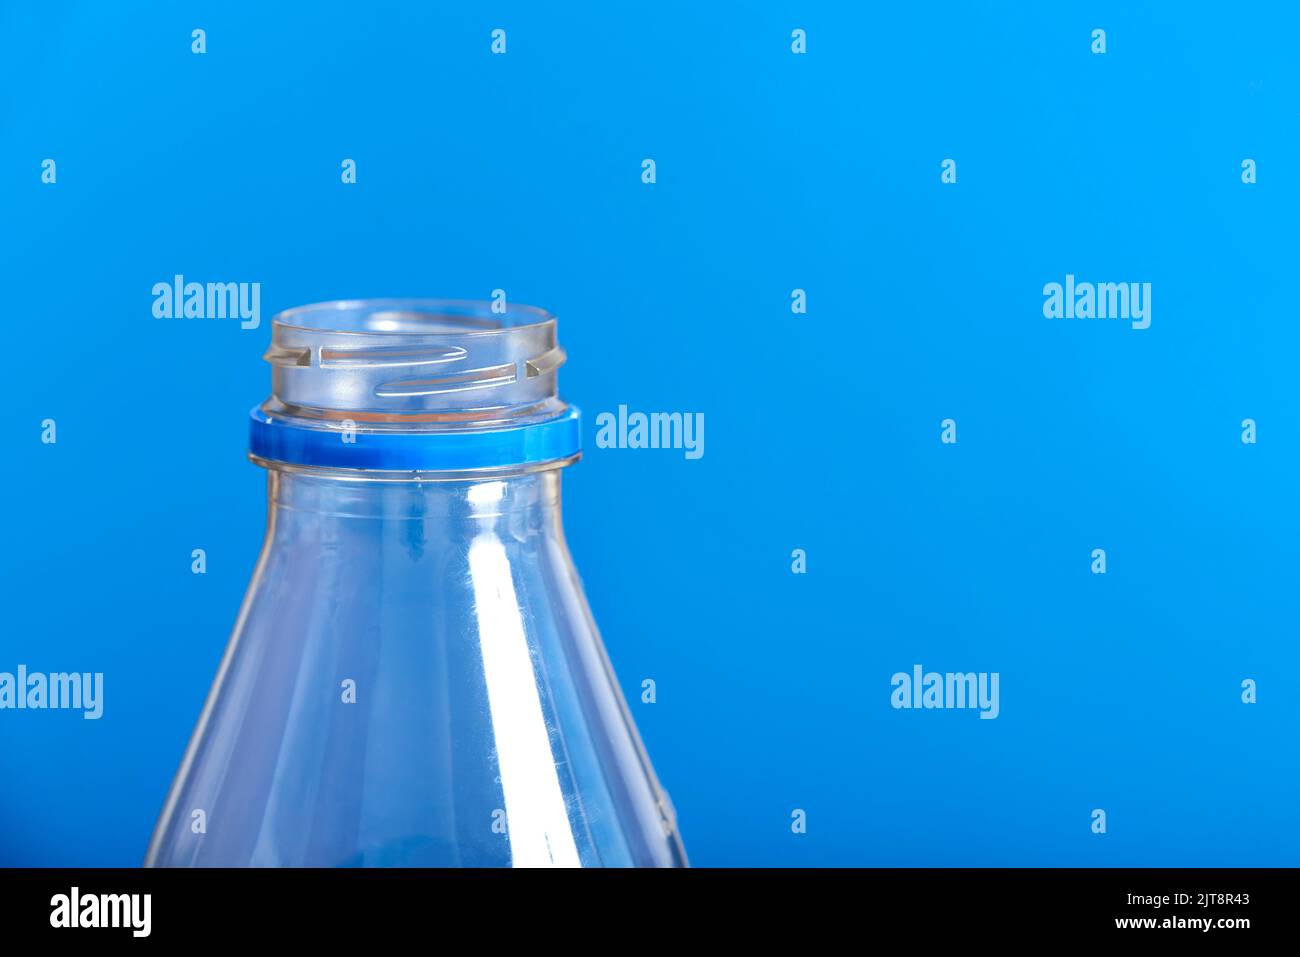 https://c8.alamy.com/comp/2JT8R43/top-of-an-empty-plastic-transparent-disposable-bottle-and-blue-background-concepts-sustainability-recycling-pollution-zero-waste-campaigns-2JT8R43.jpg